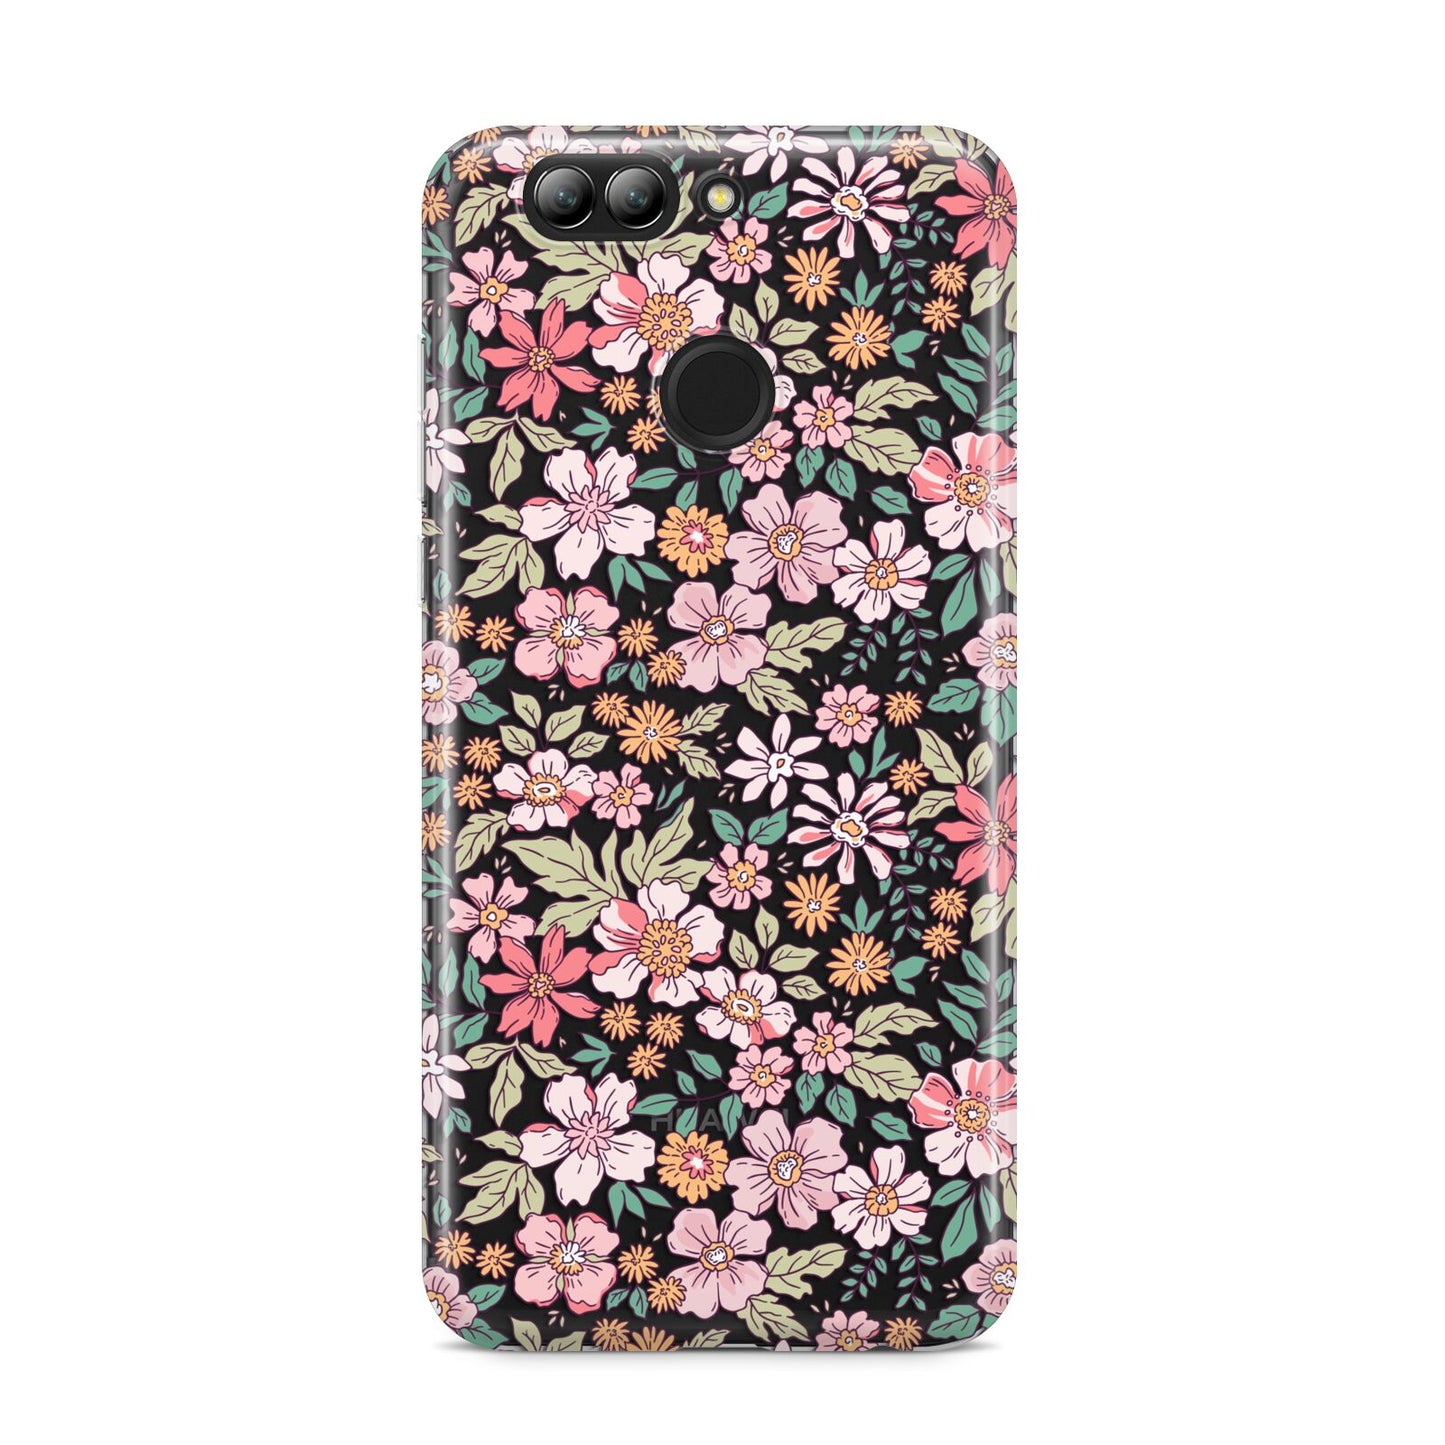 Small Floral Pattern Huawei Nova 2s Phone Case